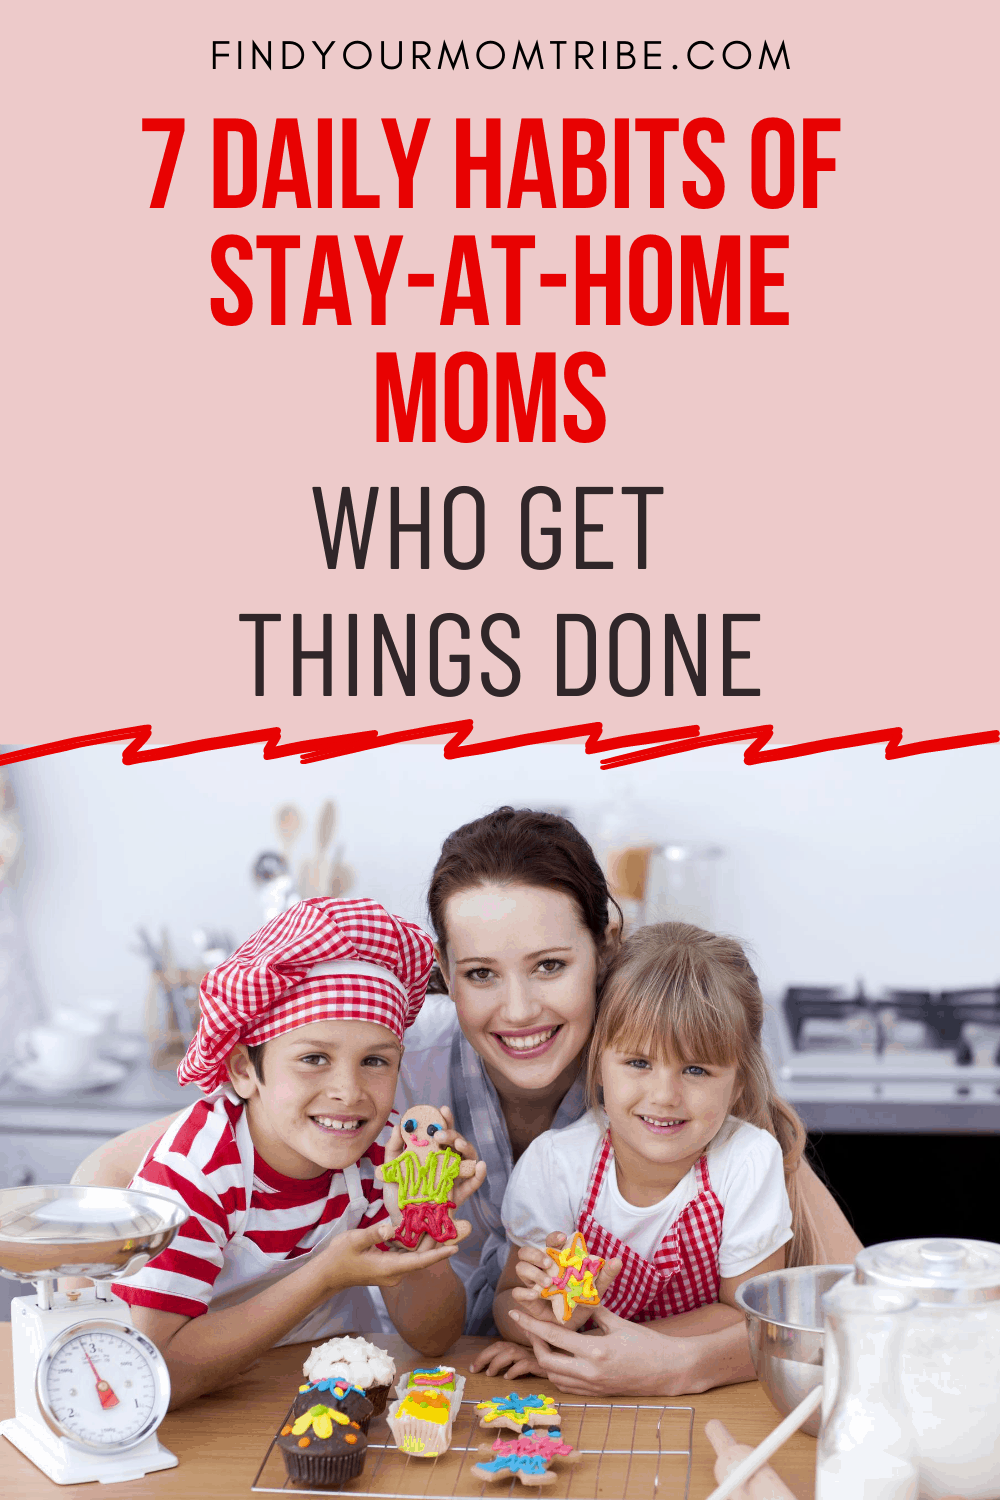 Pinterest 7 Daily Habits of Stay-at-Home Moms Who Get Things Done 